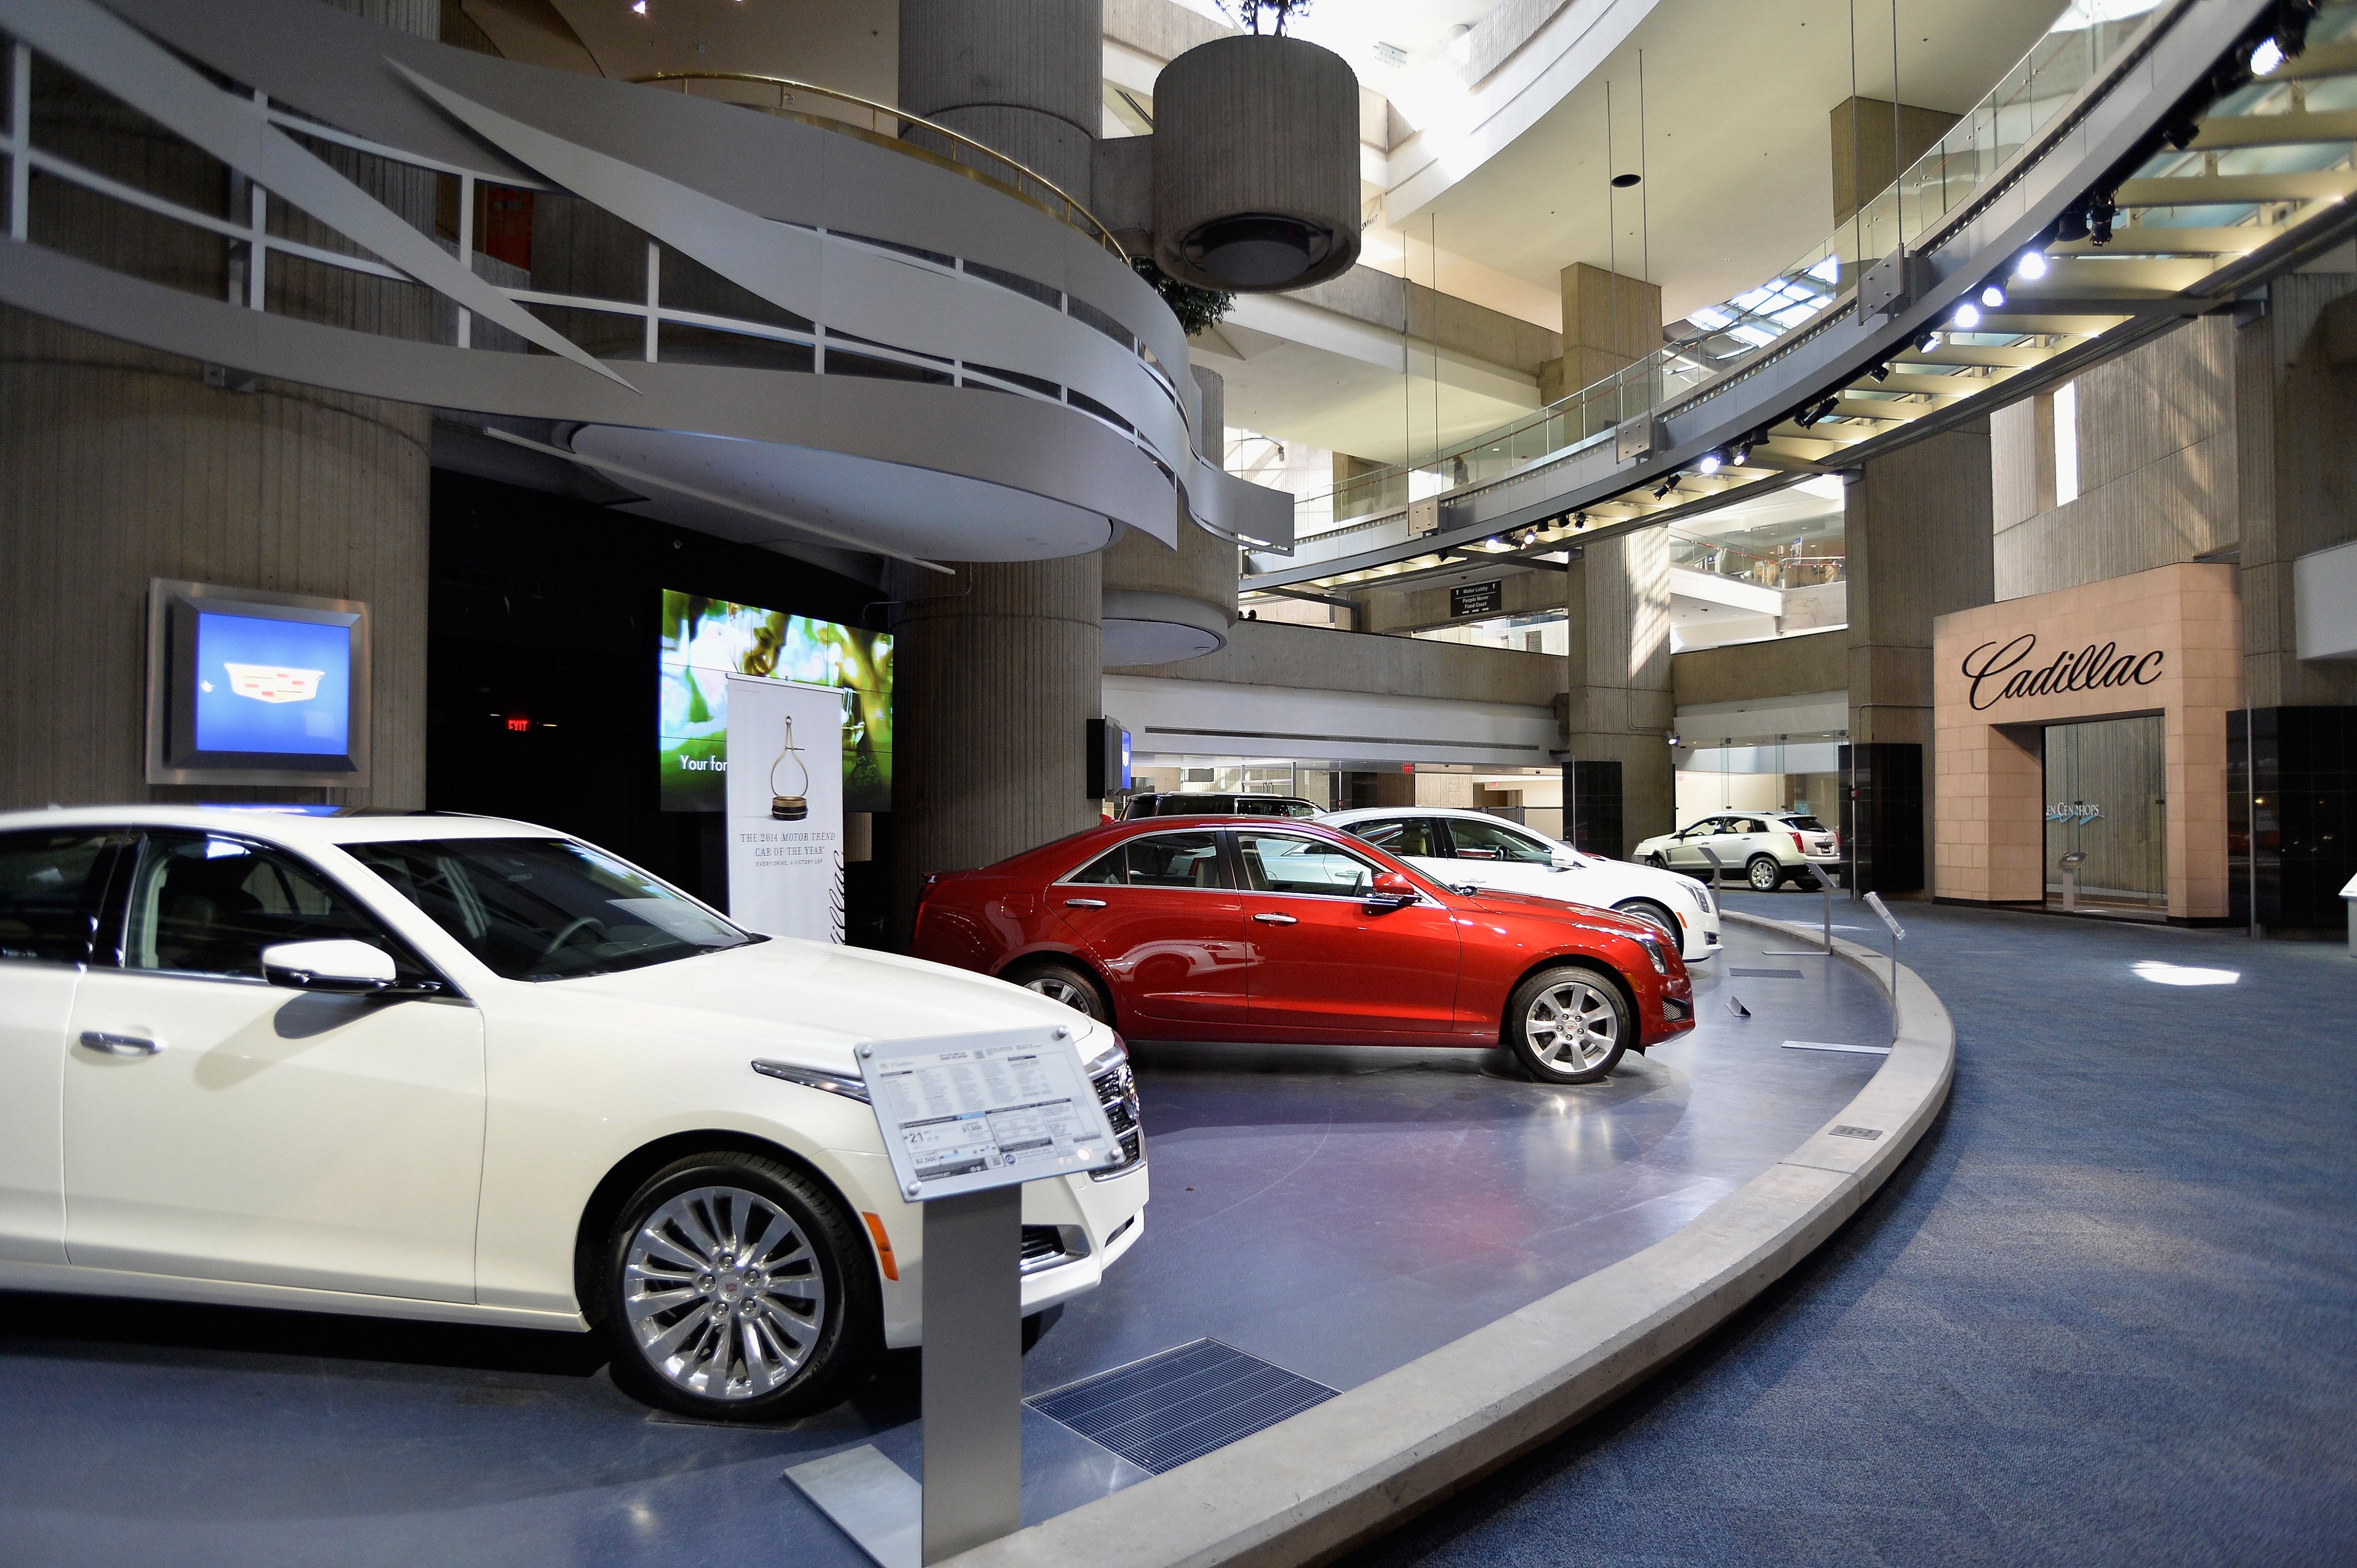 A general view of the Cadillac showroom in the General Motors Renaissance Center on August 14, 2014 in Detroit, Michigan. (Paul Marotta—Getty Images)